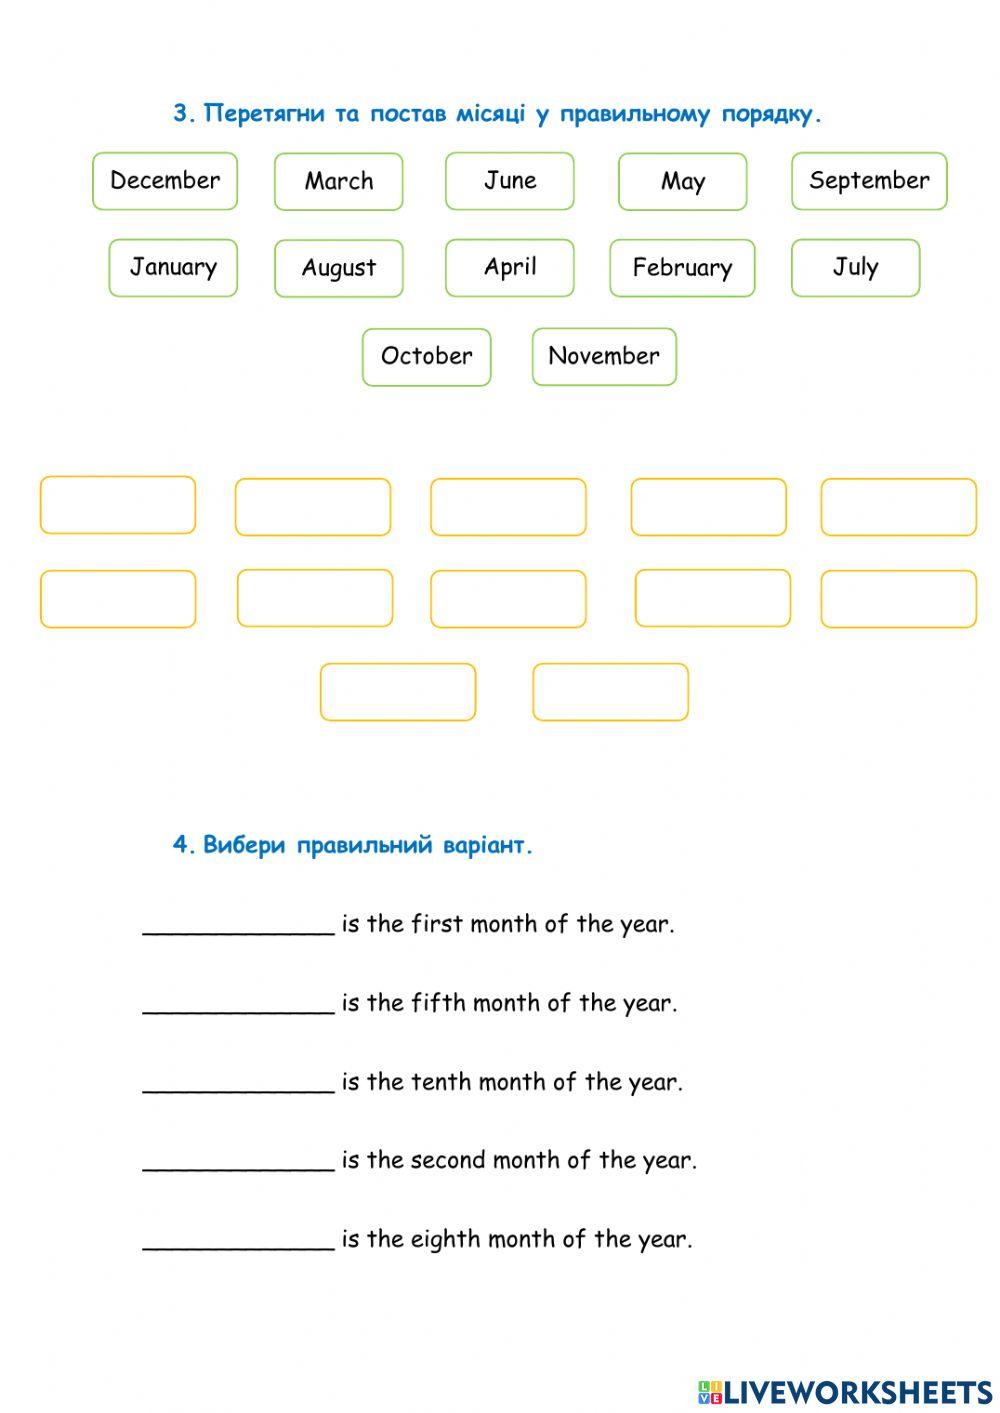 Ordinal numbers and months